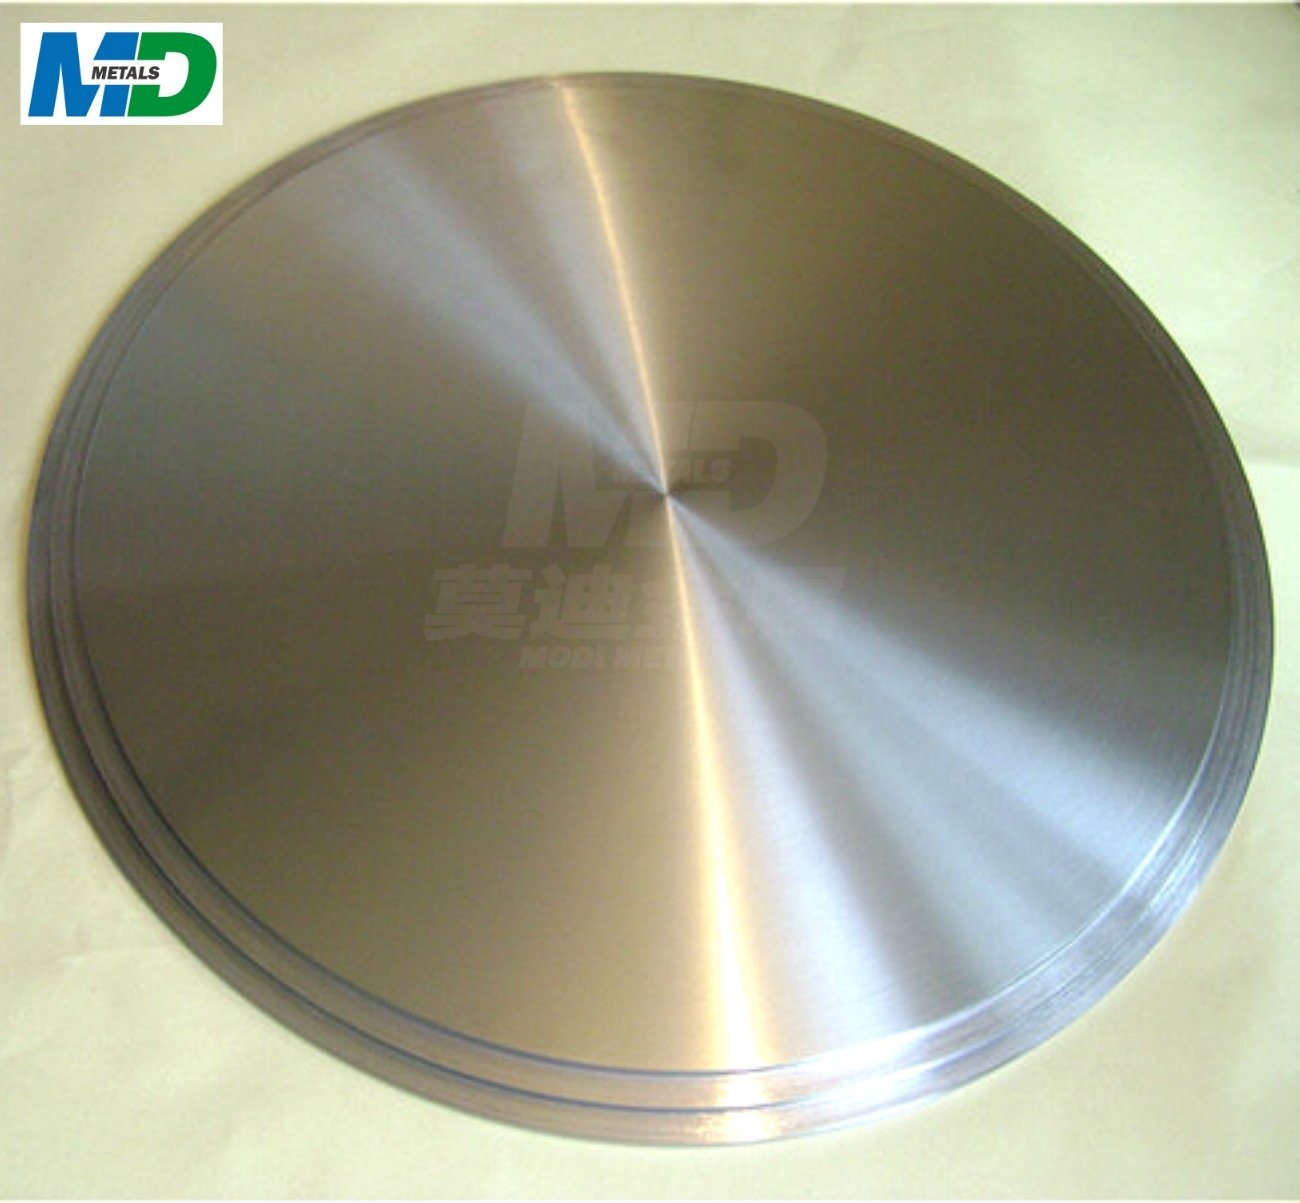 China Manufacturer and Supplier of Customized Molybdenum Tar